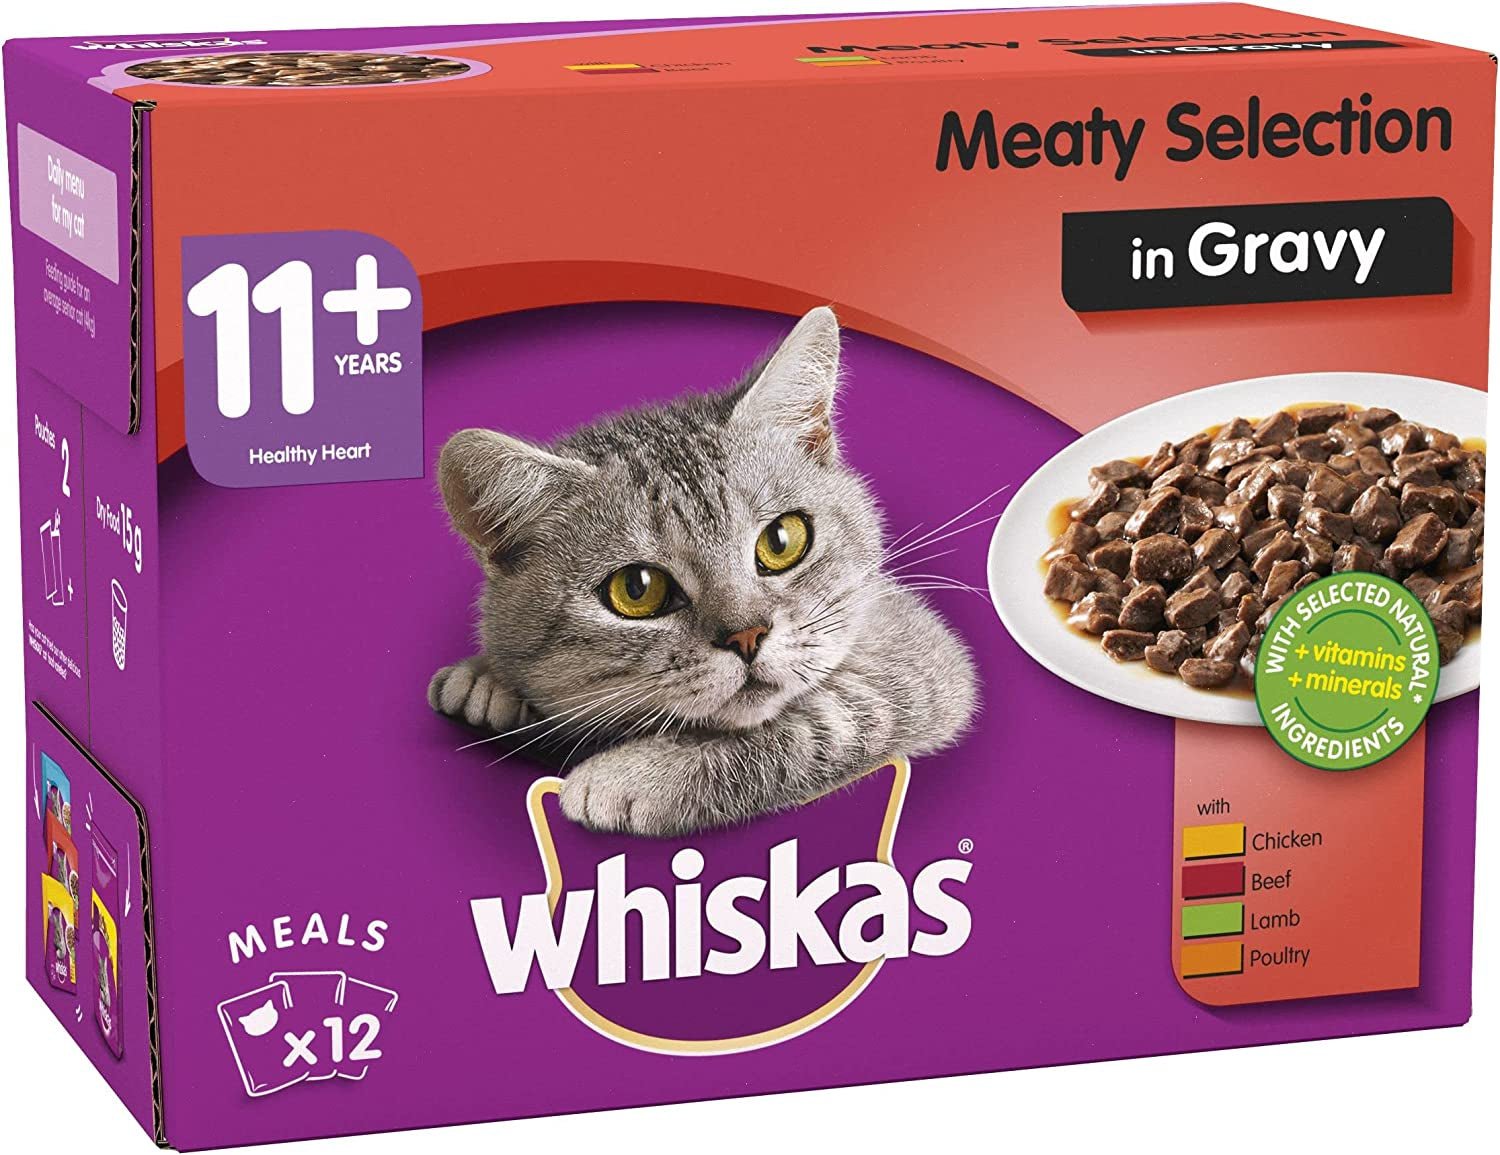 Wet Pouches, Delicious and Tasty Meaty Selection in Gravy, Suitable for Senior Cats Aged 11+, (12 Pouches X 100G) - FoxMart™️ - whiskas